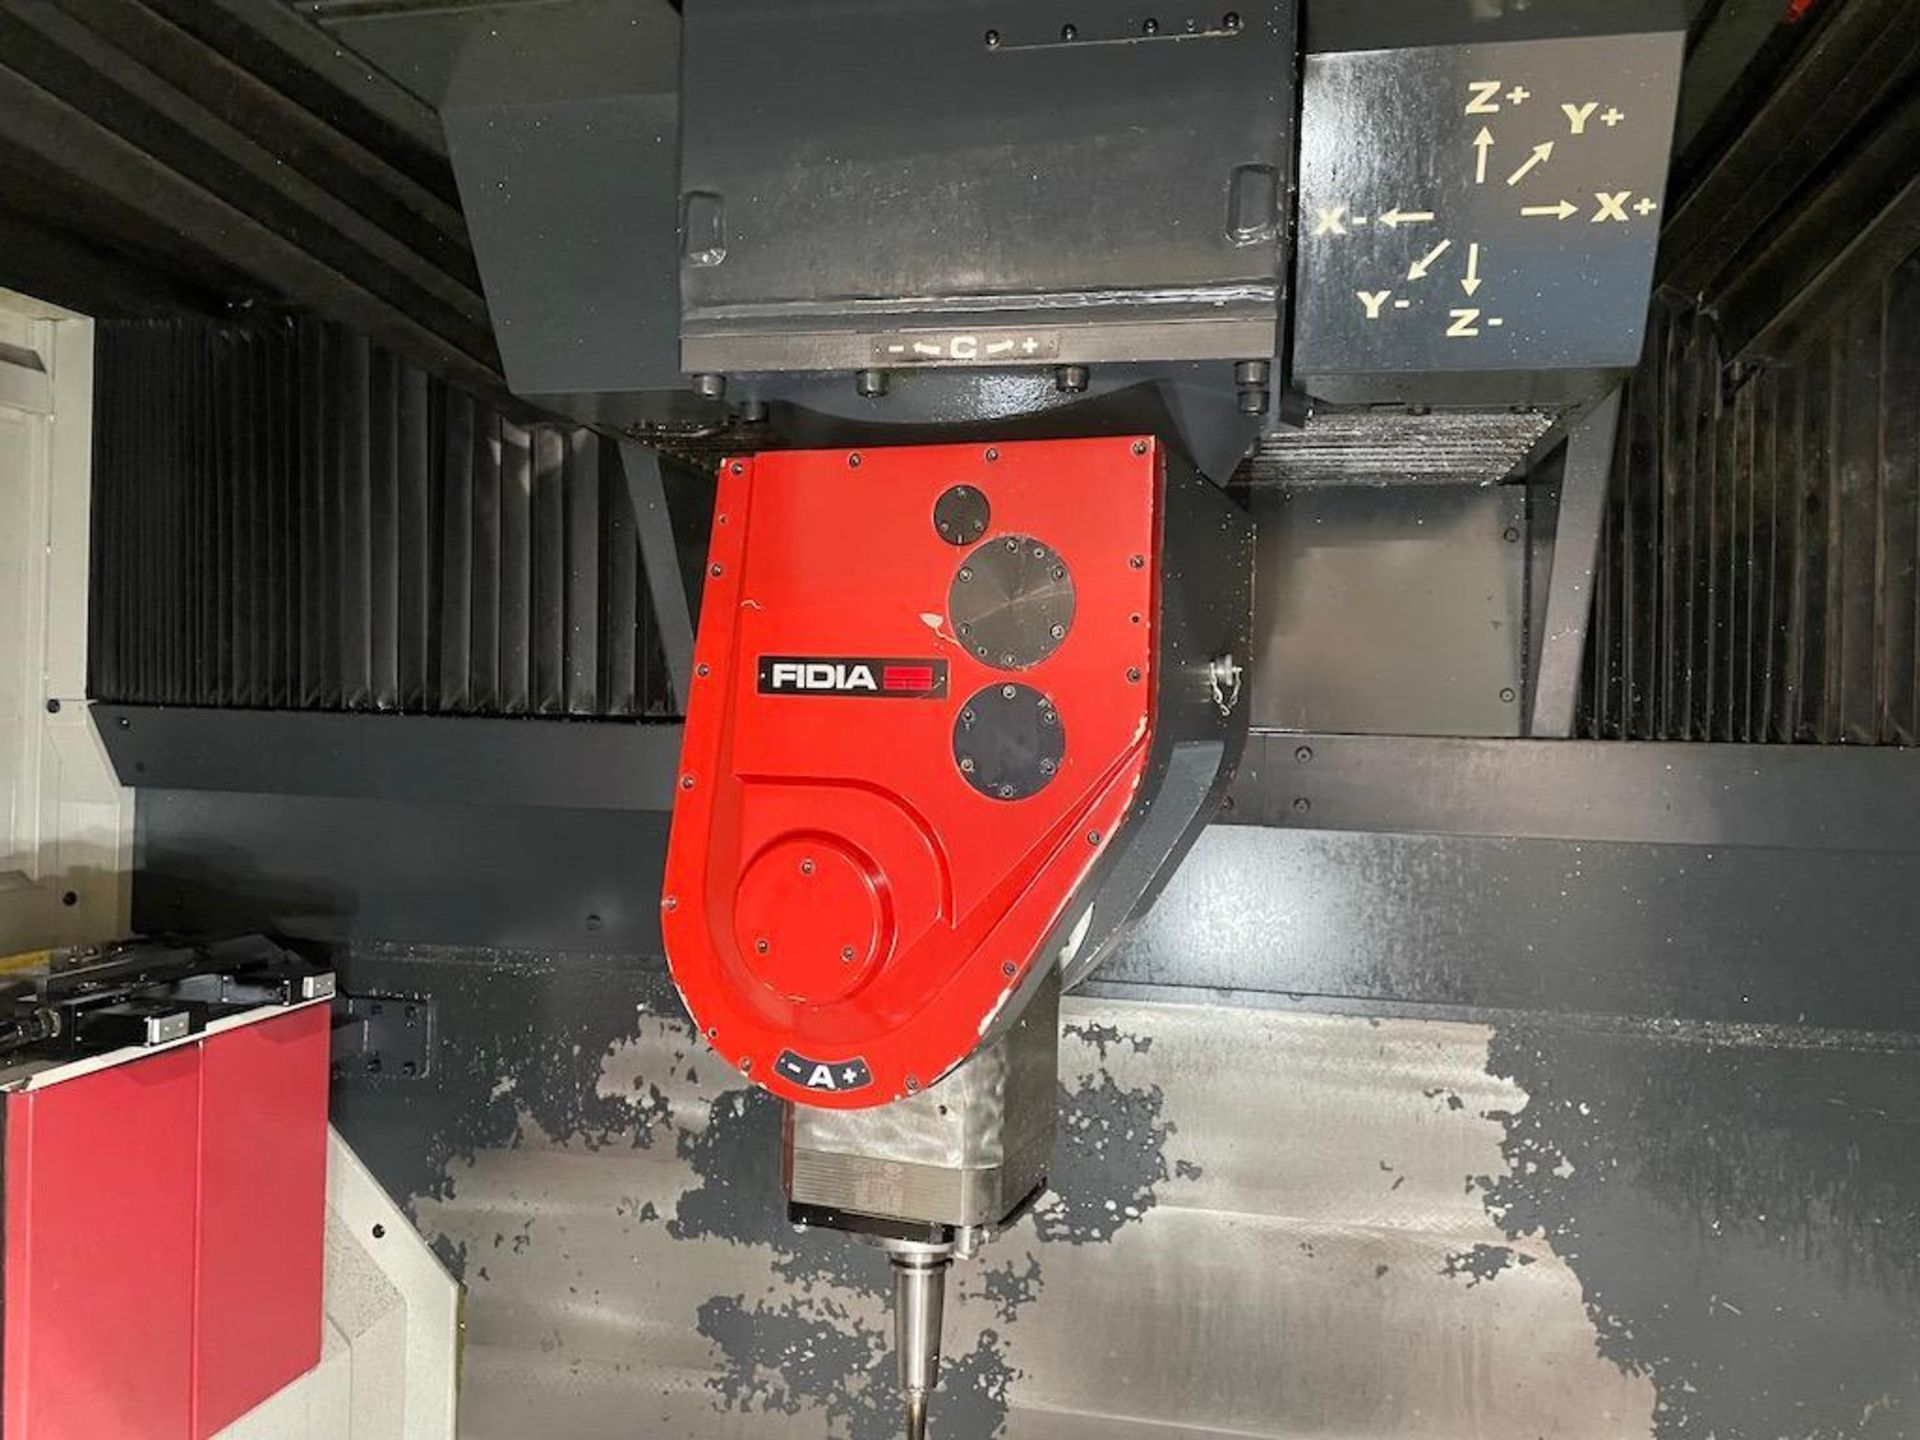 Fidia K197/BHS 5-Axis High Speed CNC Vertical Machining Center, Fidia C20 CNC Control, 2-Axis Contou - Image 3 of 18